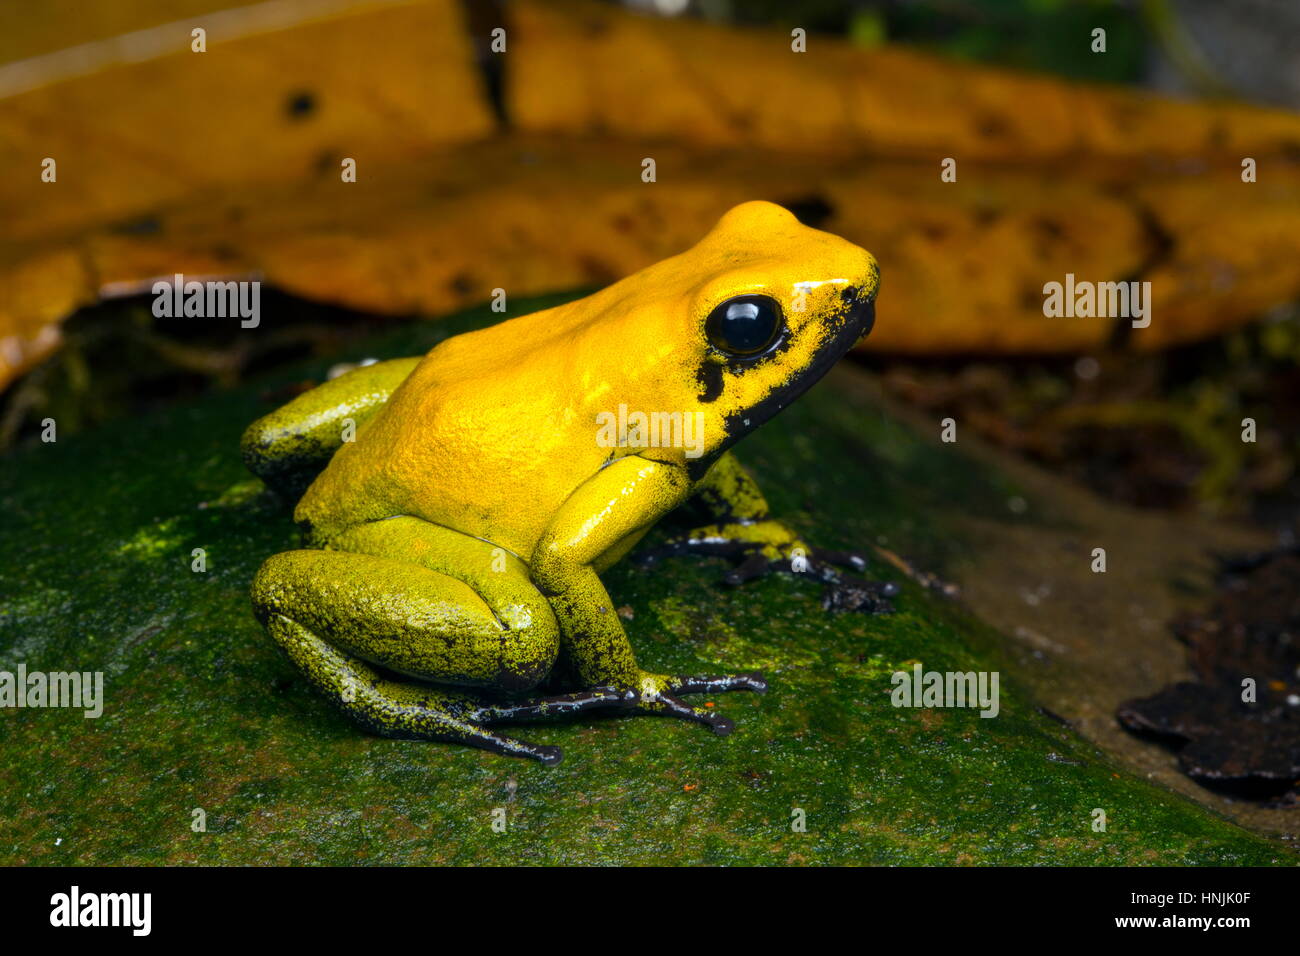 A captive bicolored poison dart frog, Dendrobates bicolor, on an algae covered rock. Stock Photo